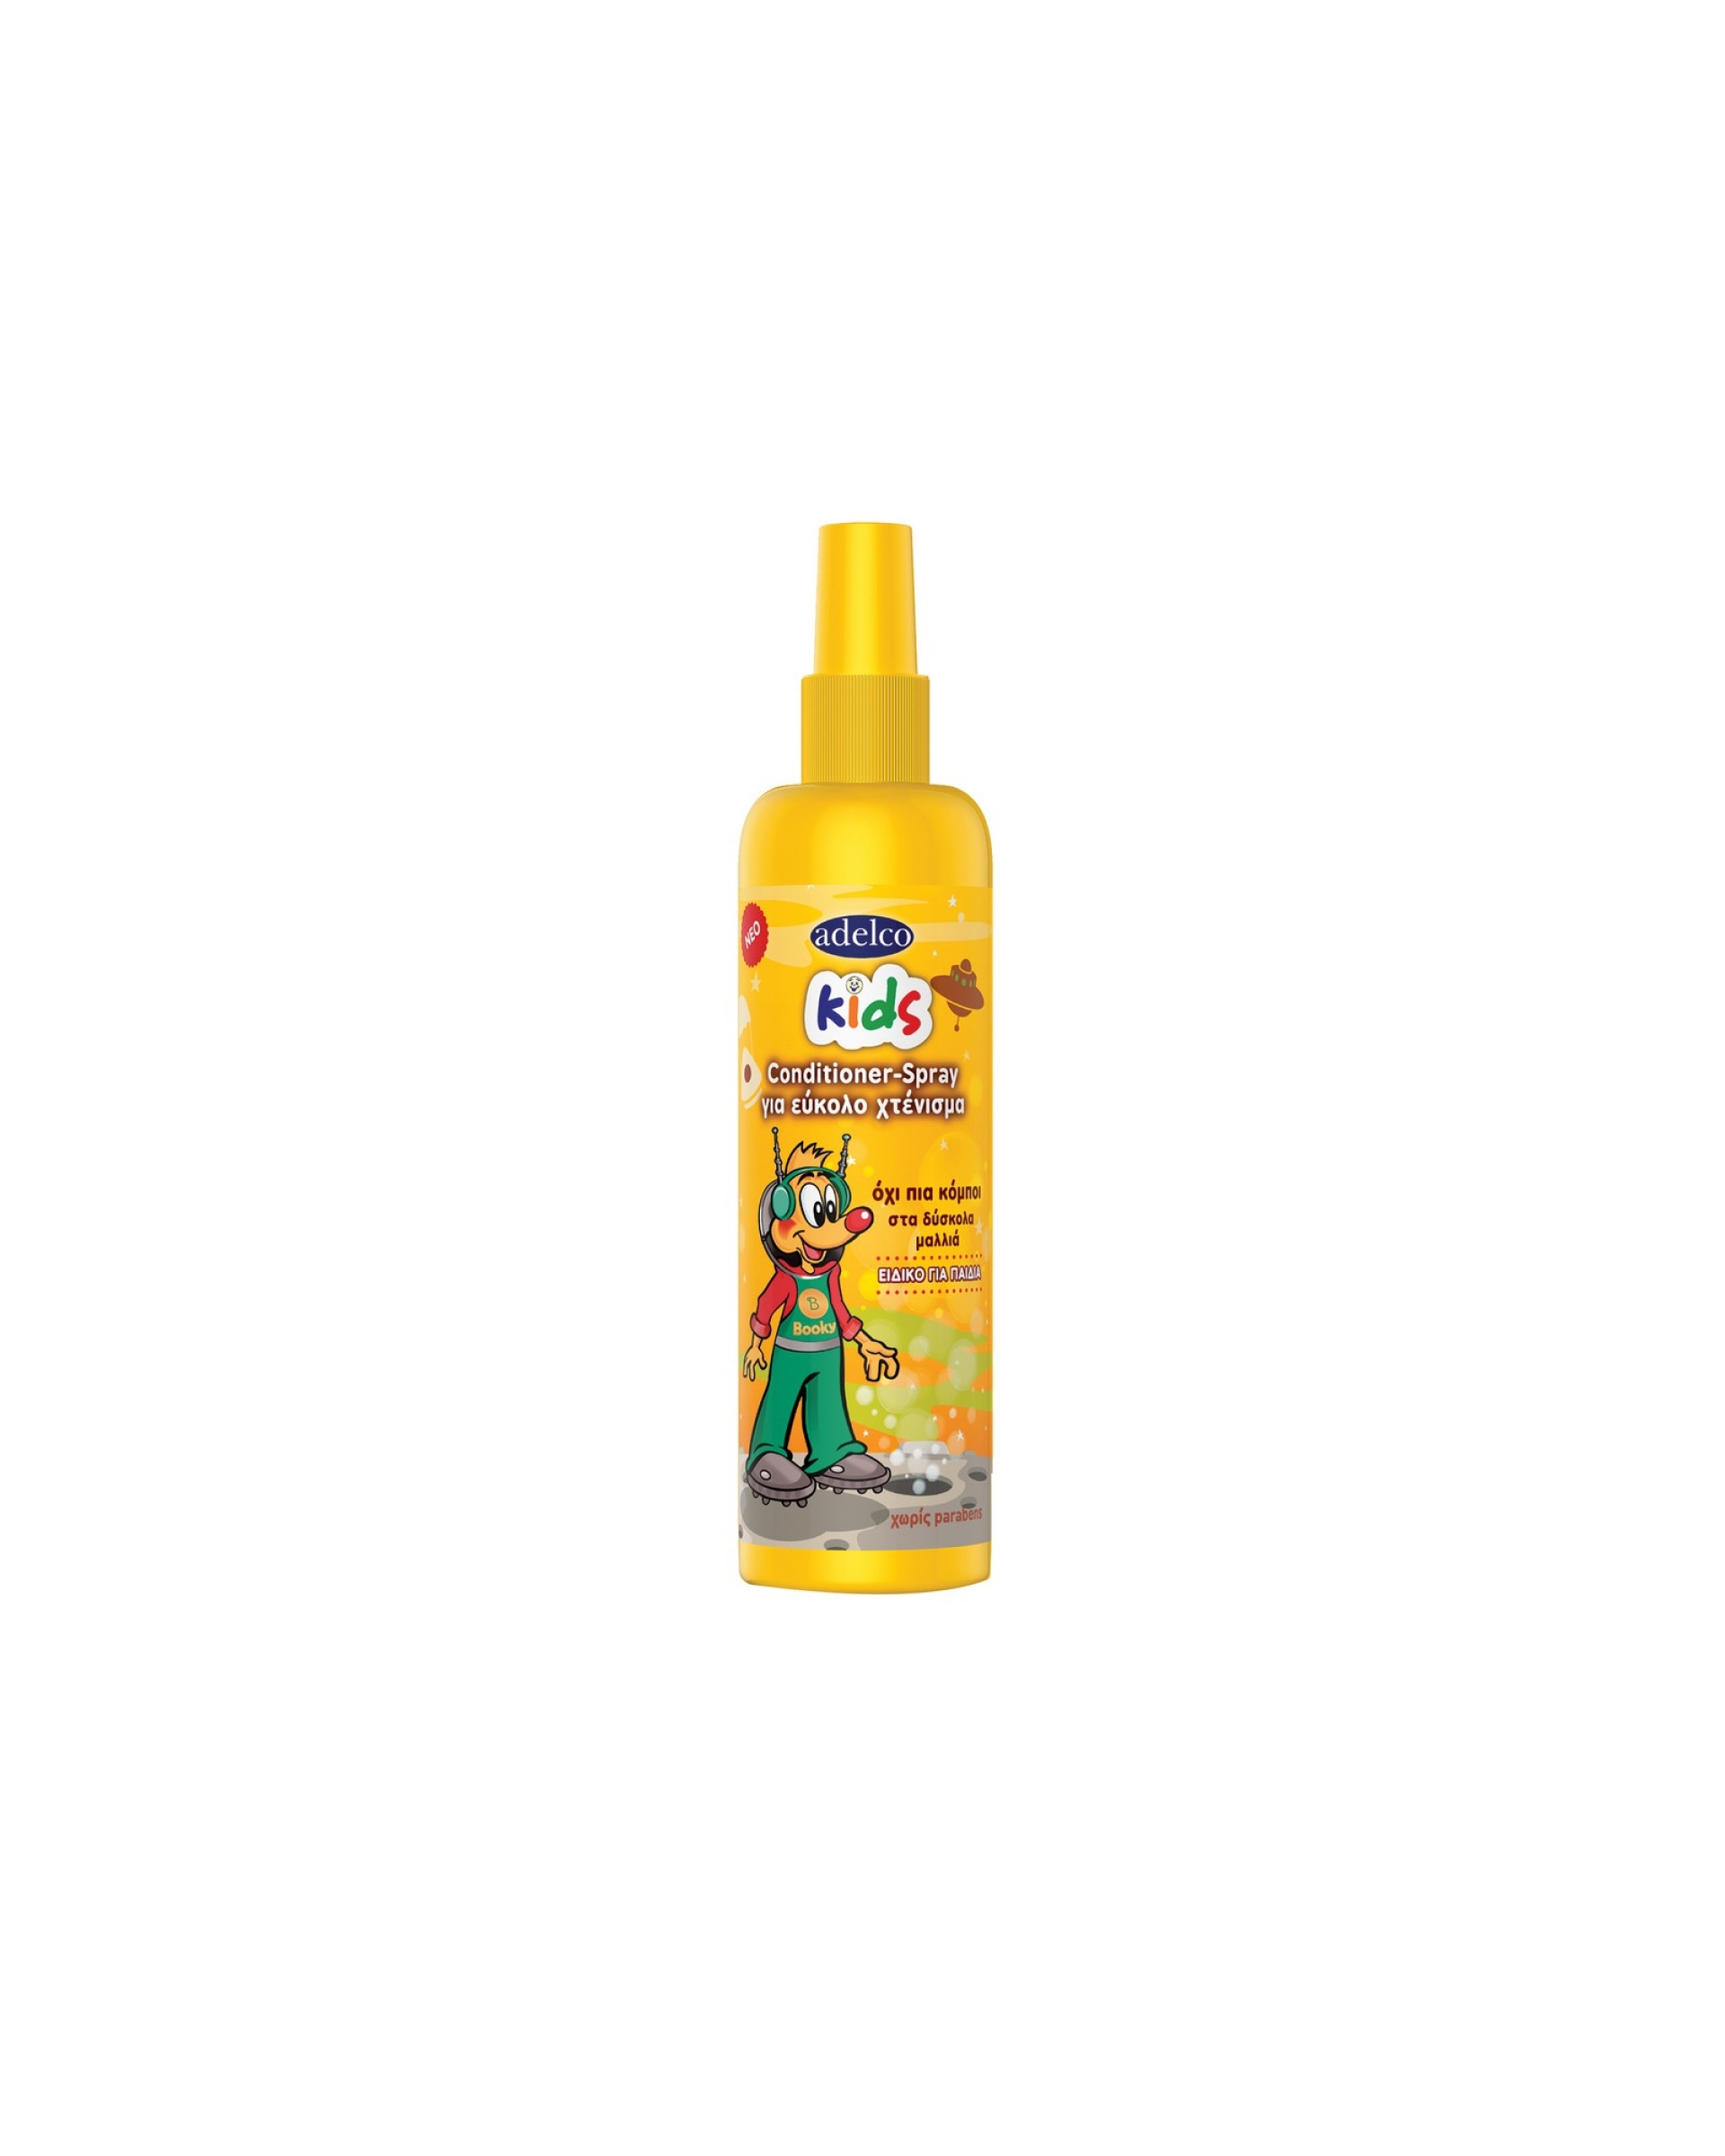 Adelco Kids Conditioner-Spray for easy combing